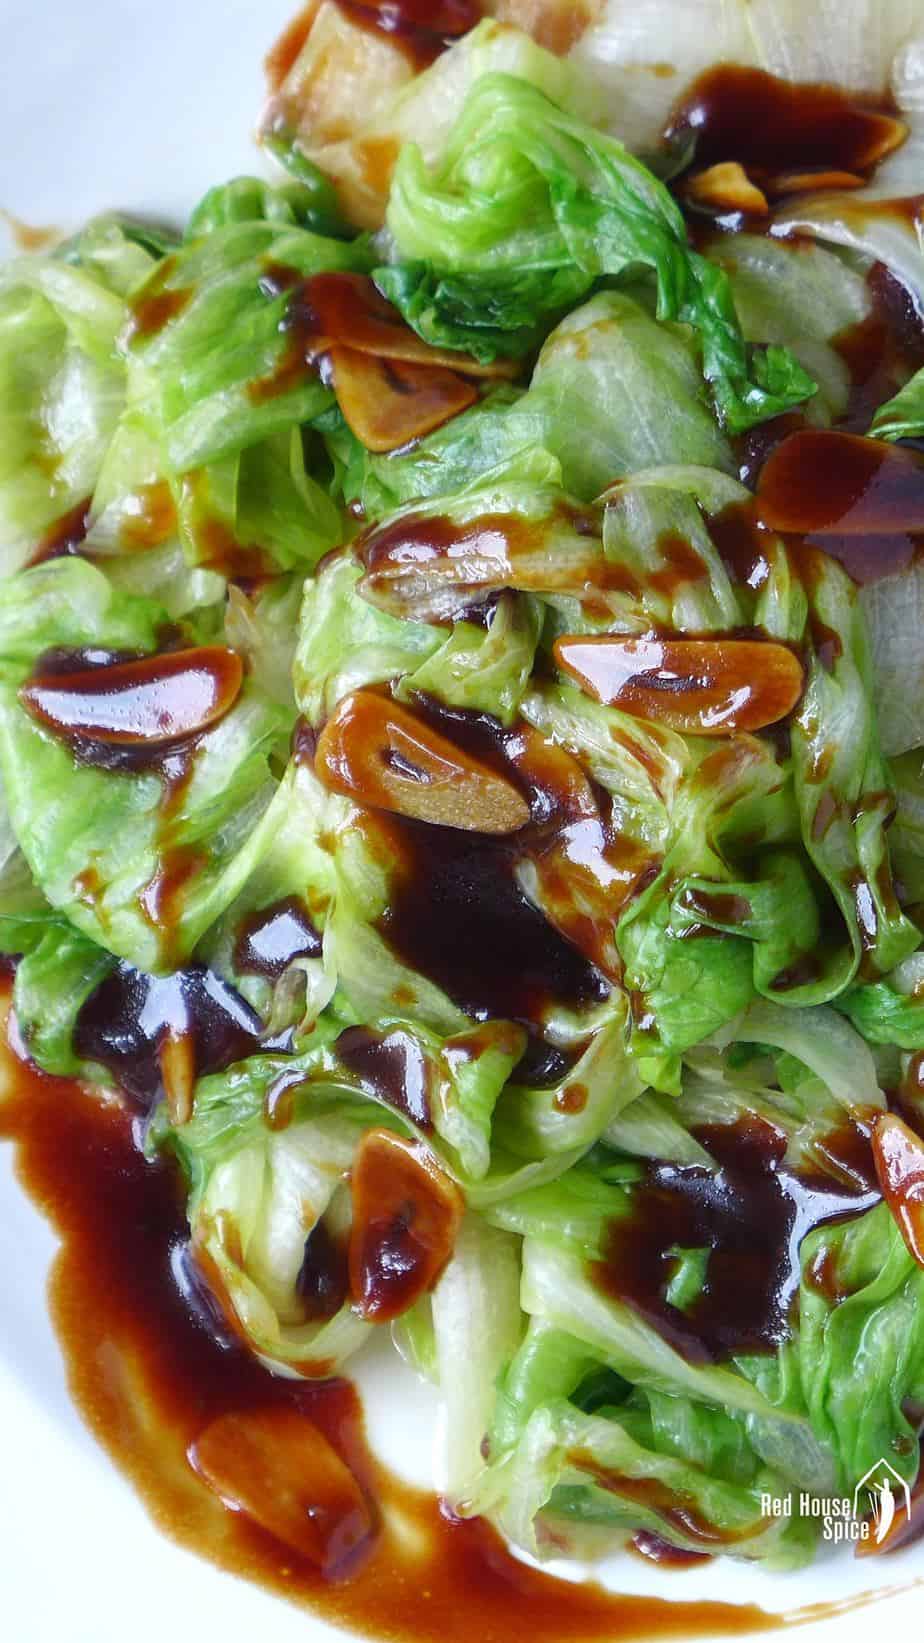 Iceberg lettuce with oyster sauce